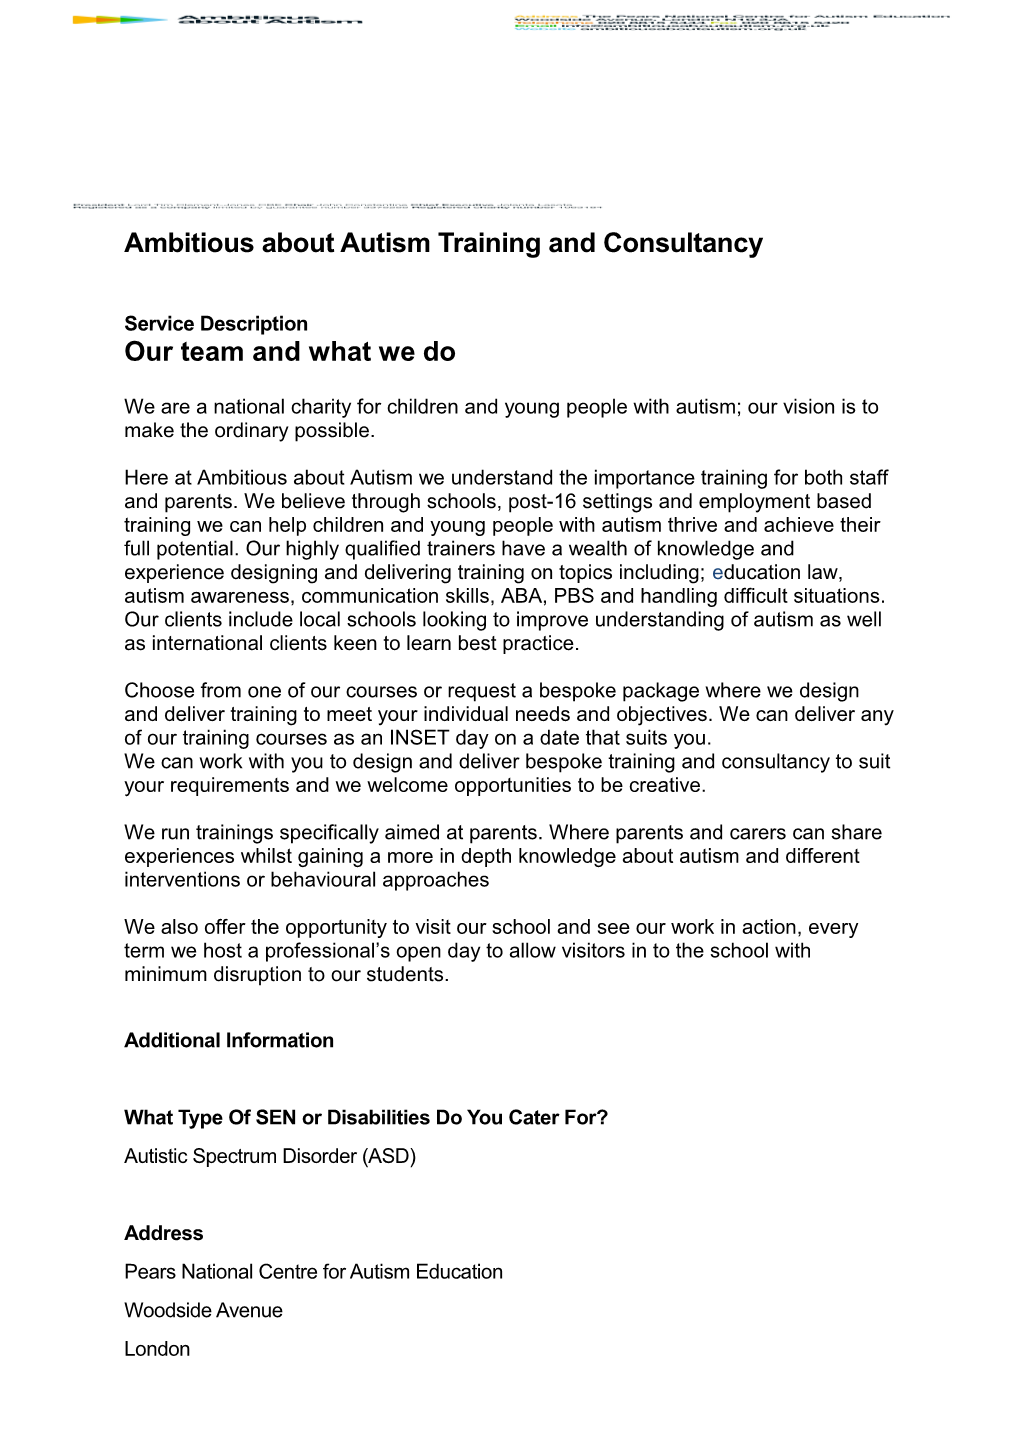 Ambitious About Autism Training and Consultancy